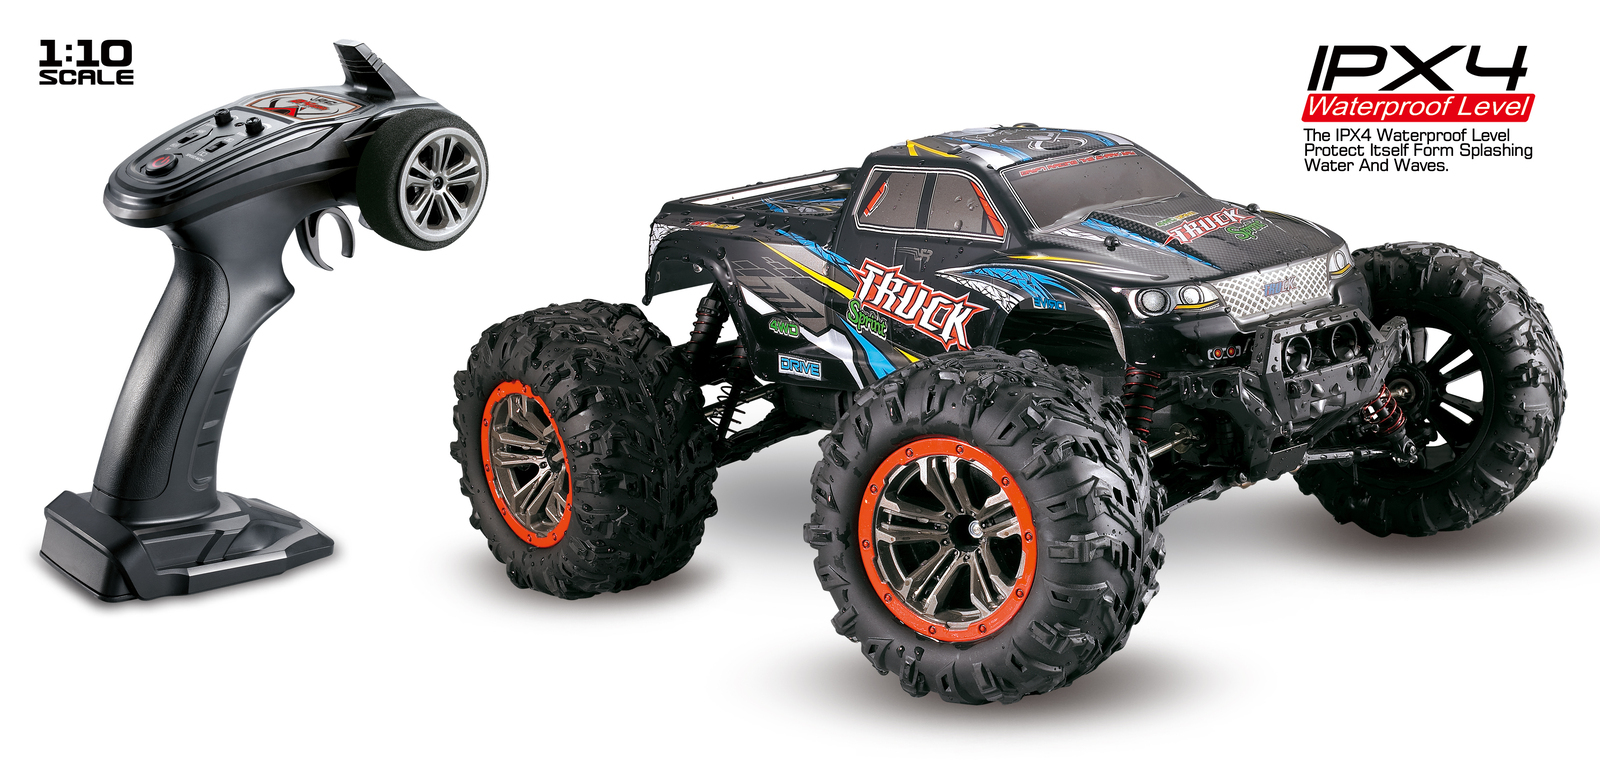 TORNADO RC 1/10 IPX4 4WD BRUSHED MONSTER TRUCK | ALBURY RC MODELS TRC-9125